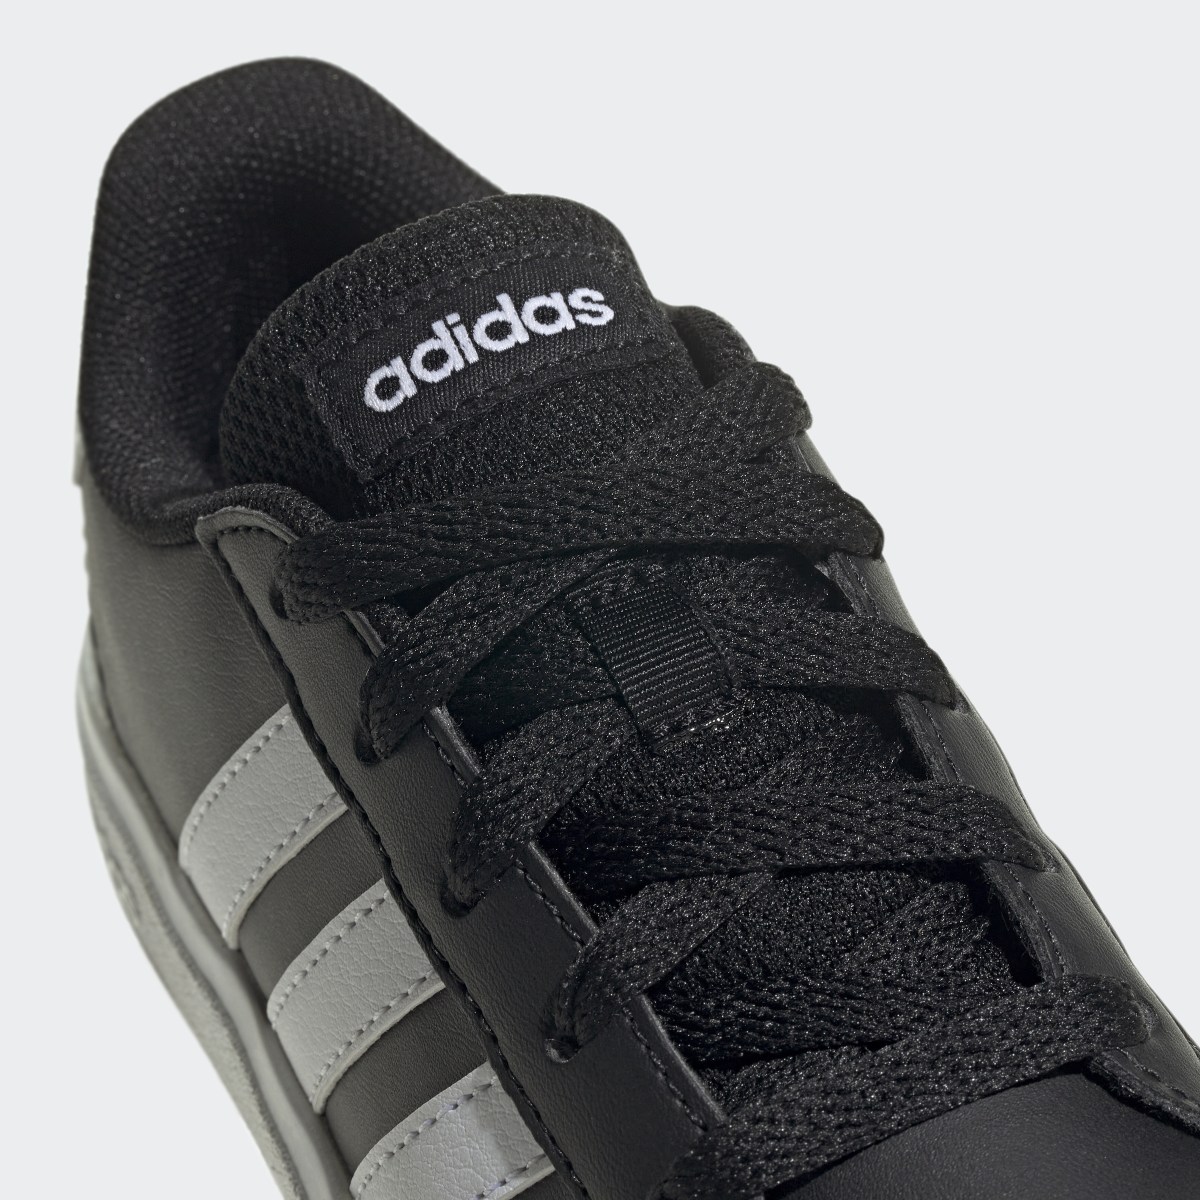 Adidas Grand Court Lifestyle Tennis Lace-Up Shoes. 9